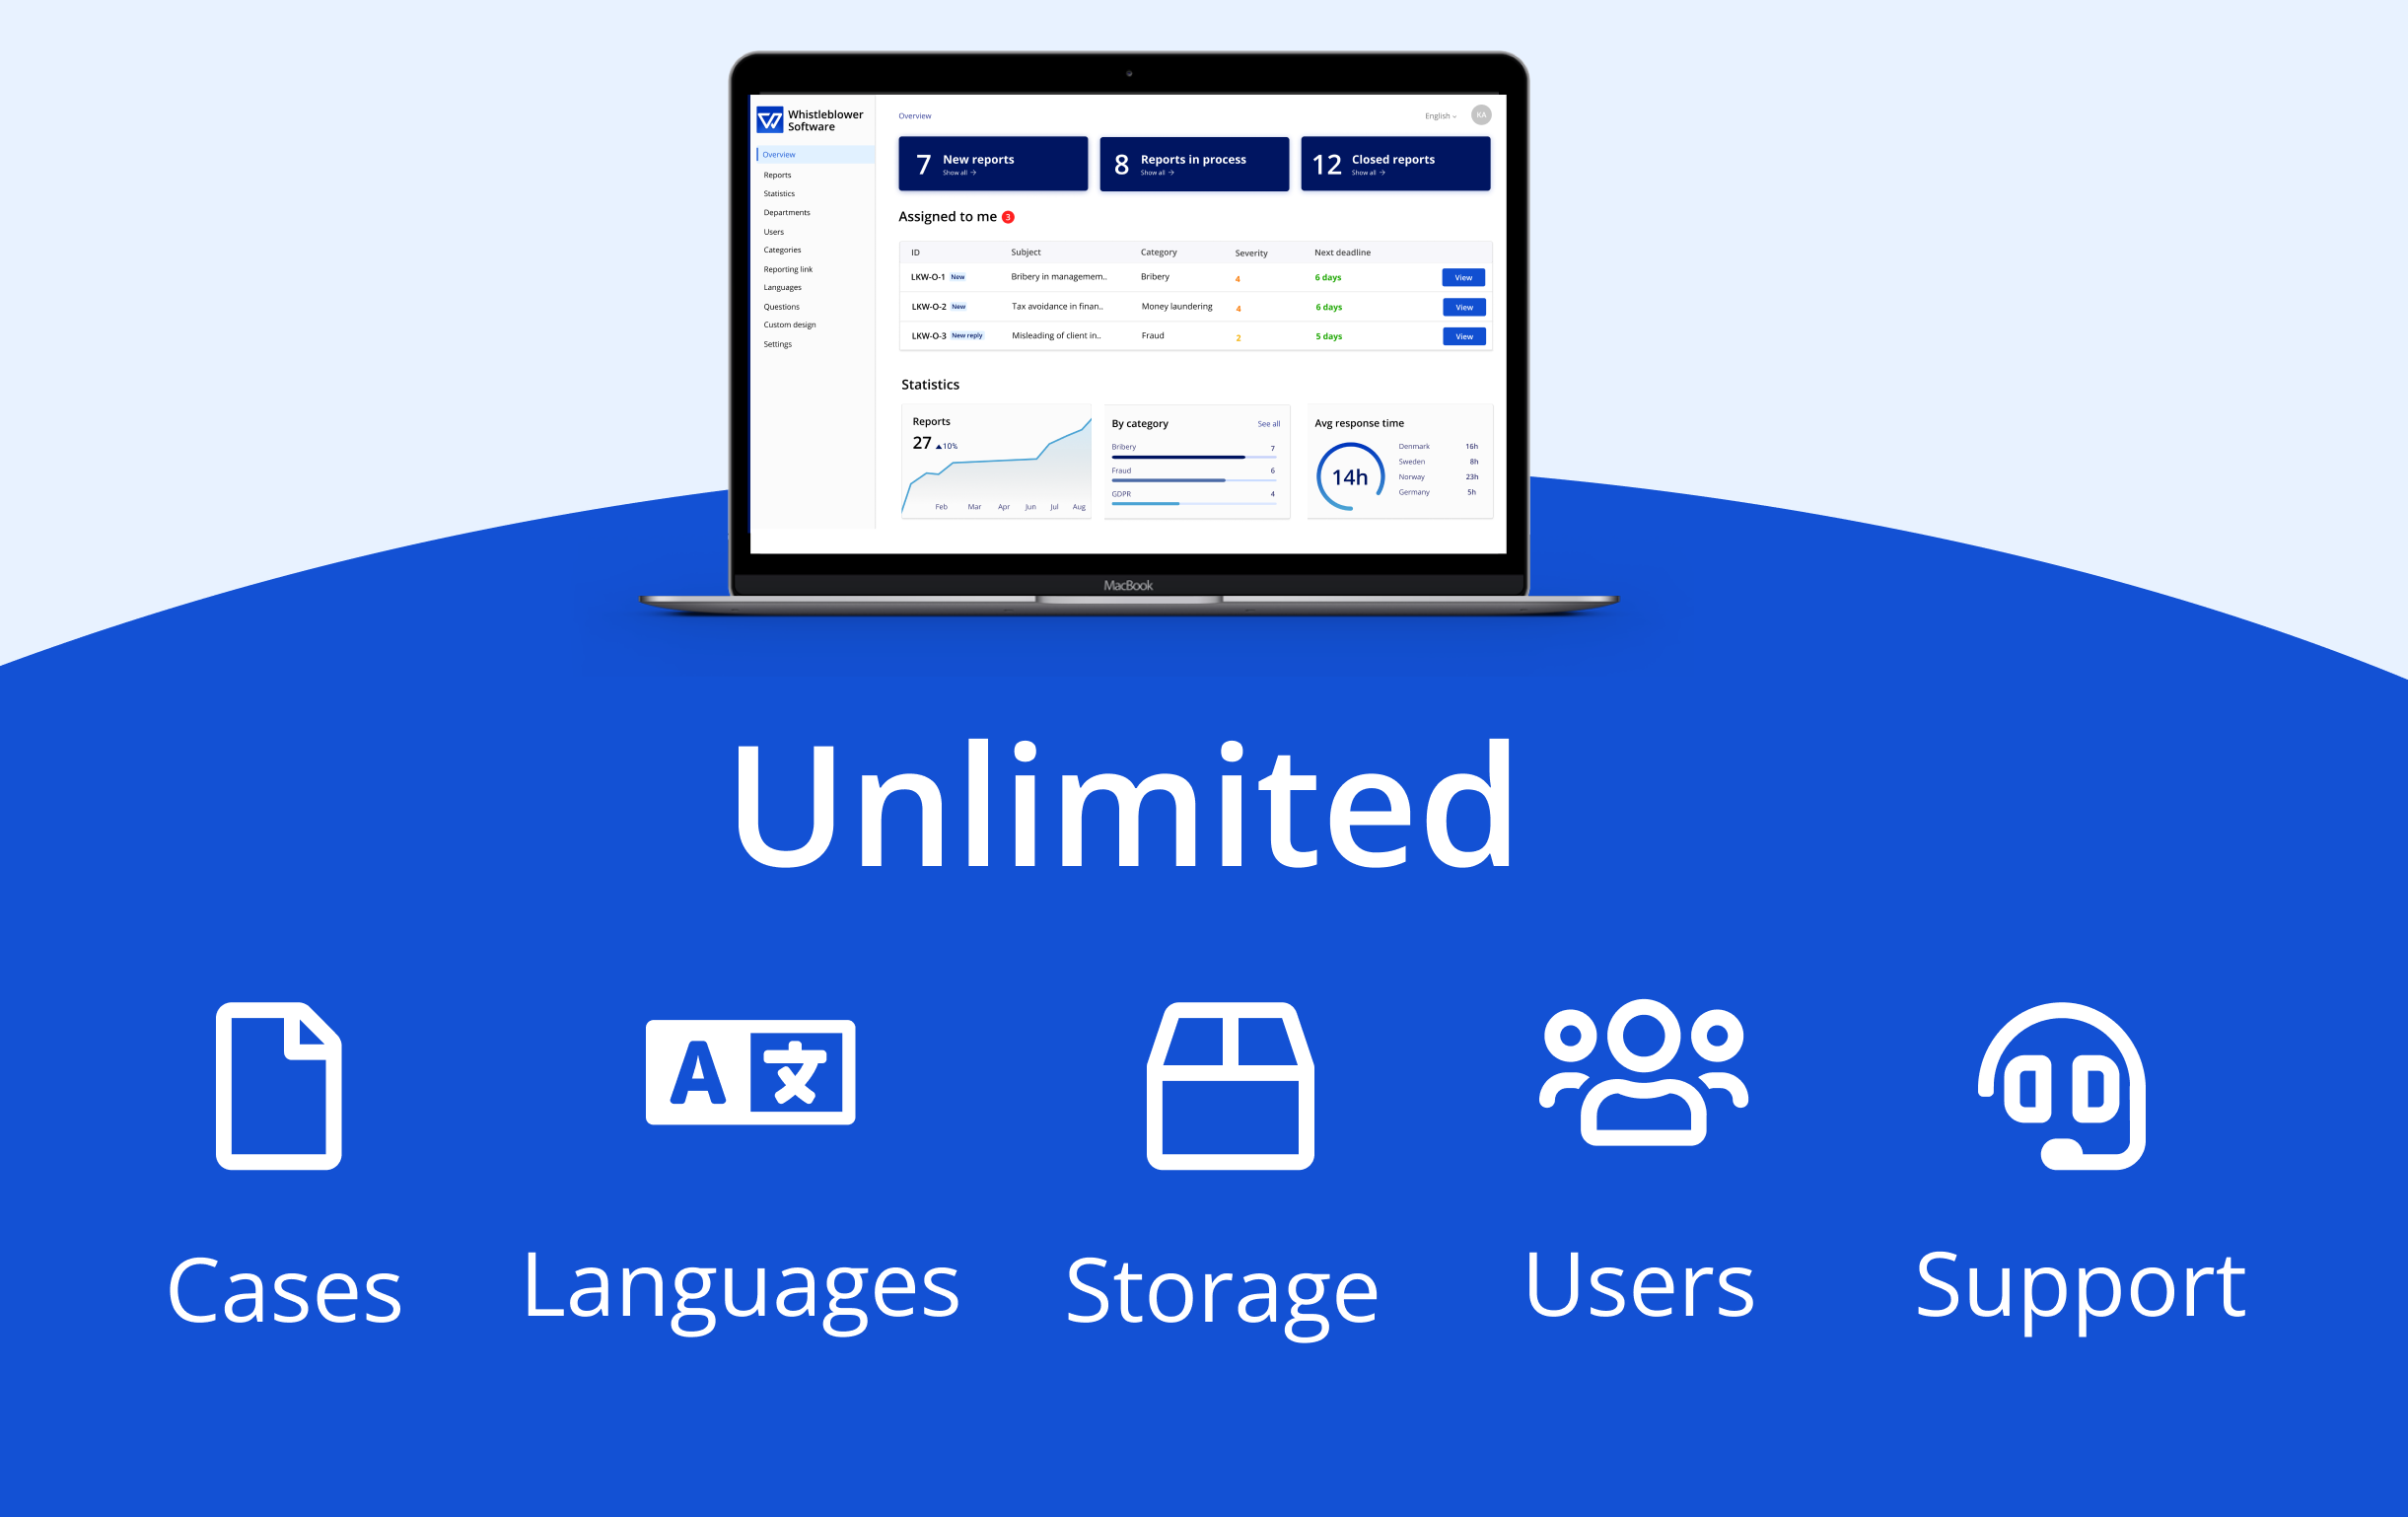 All features included - no hidden fees for extra languages or users